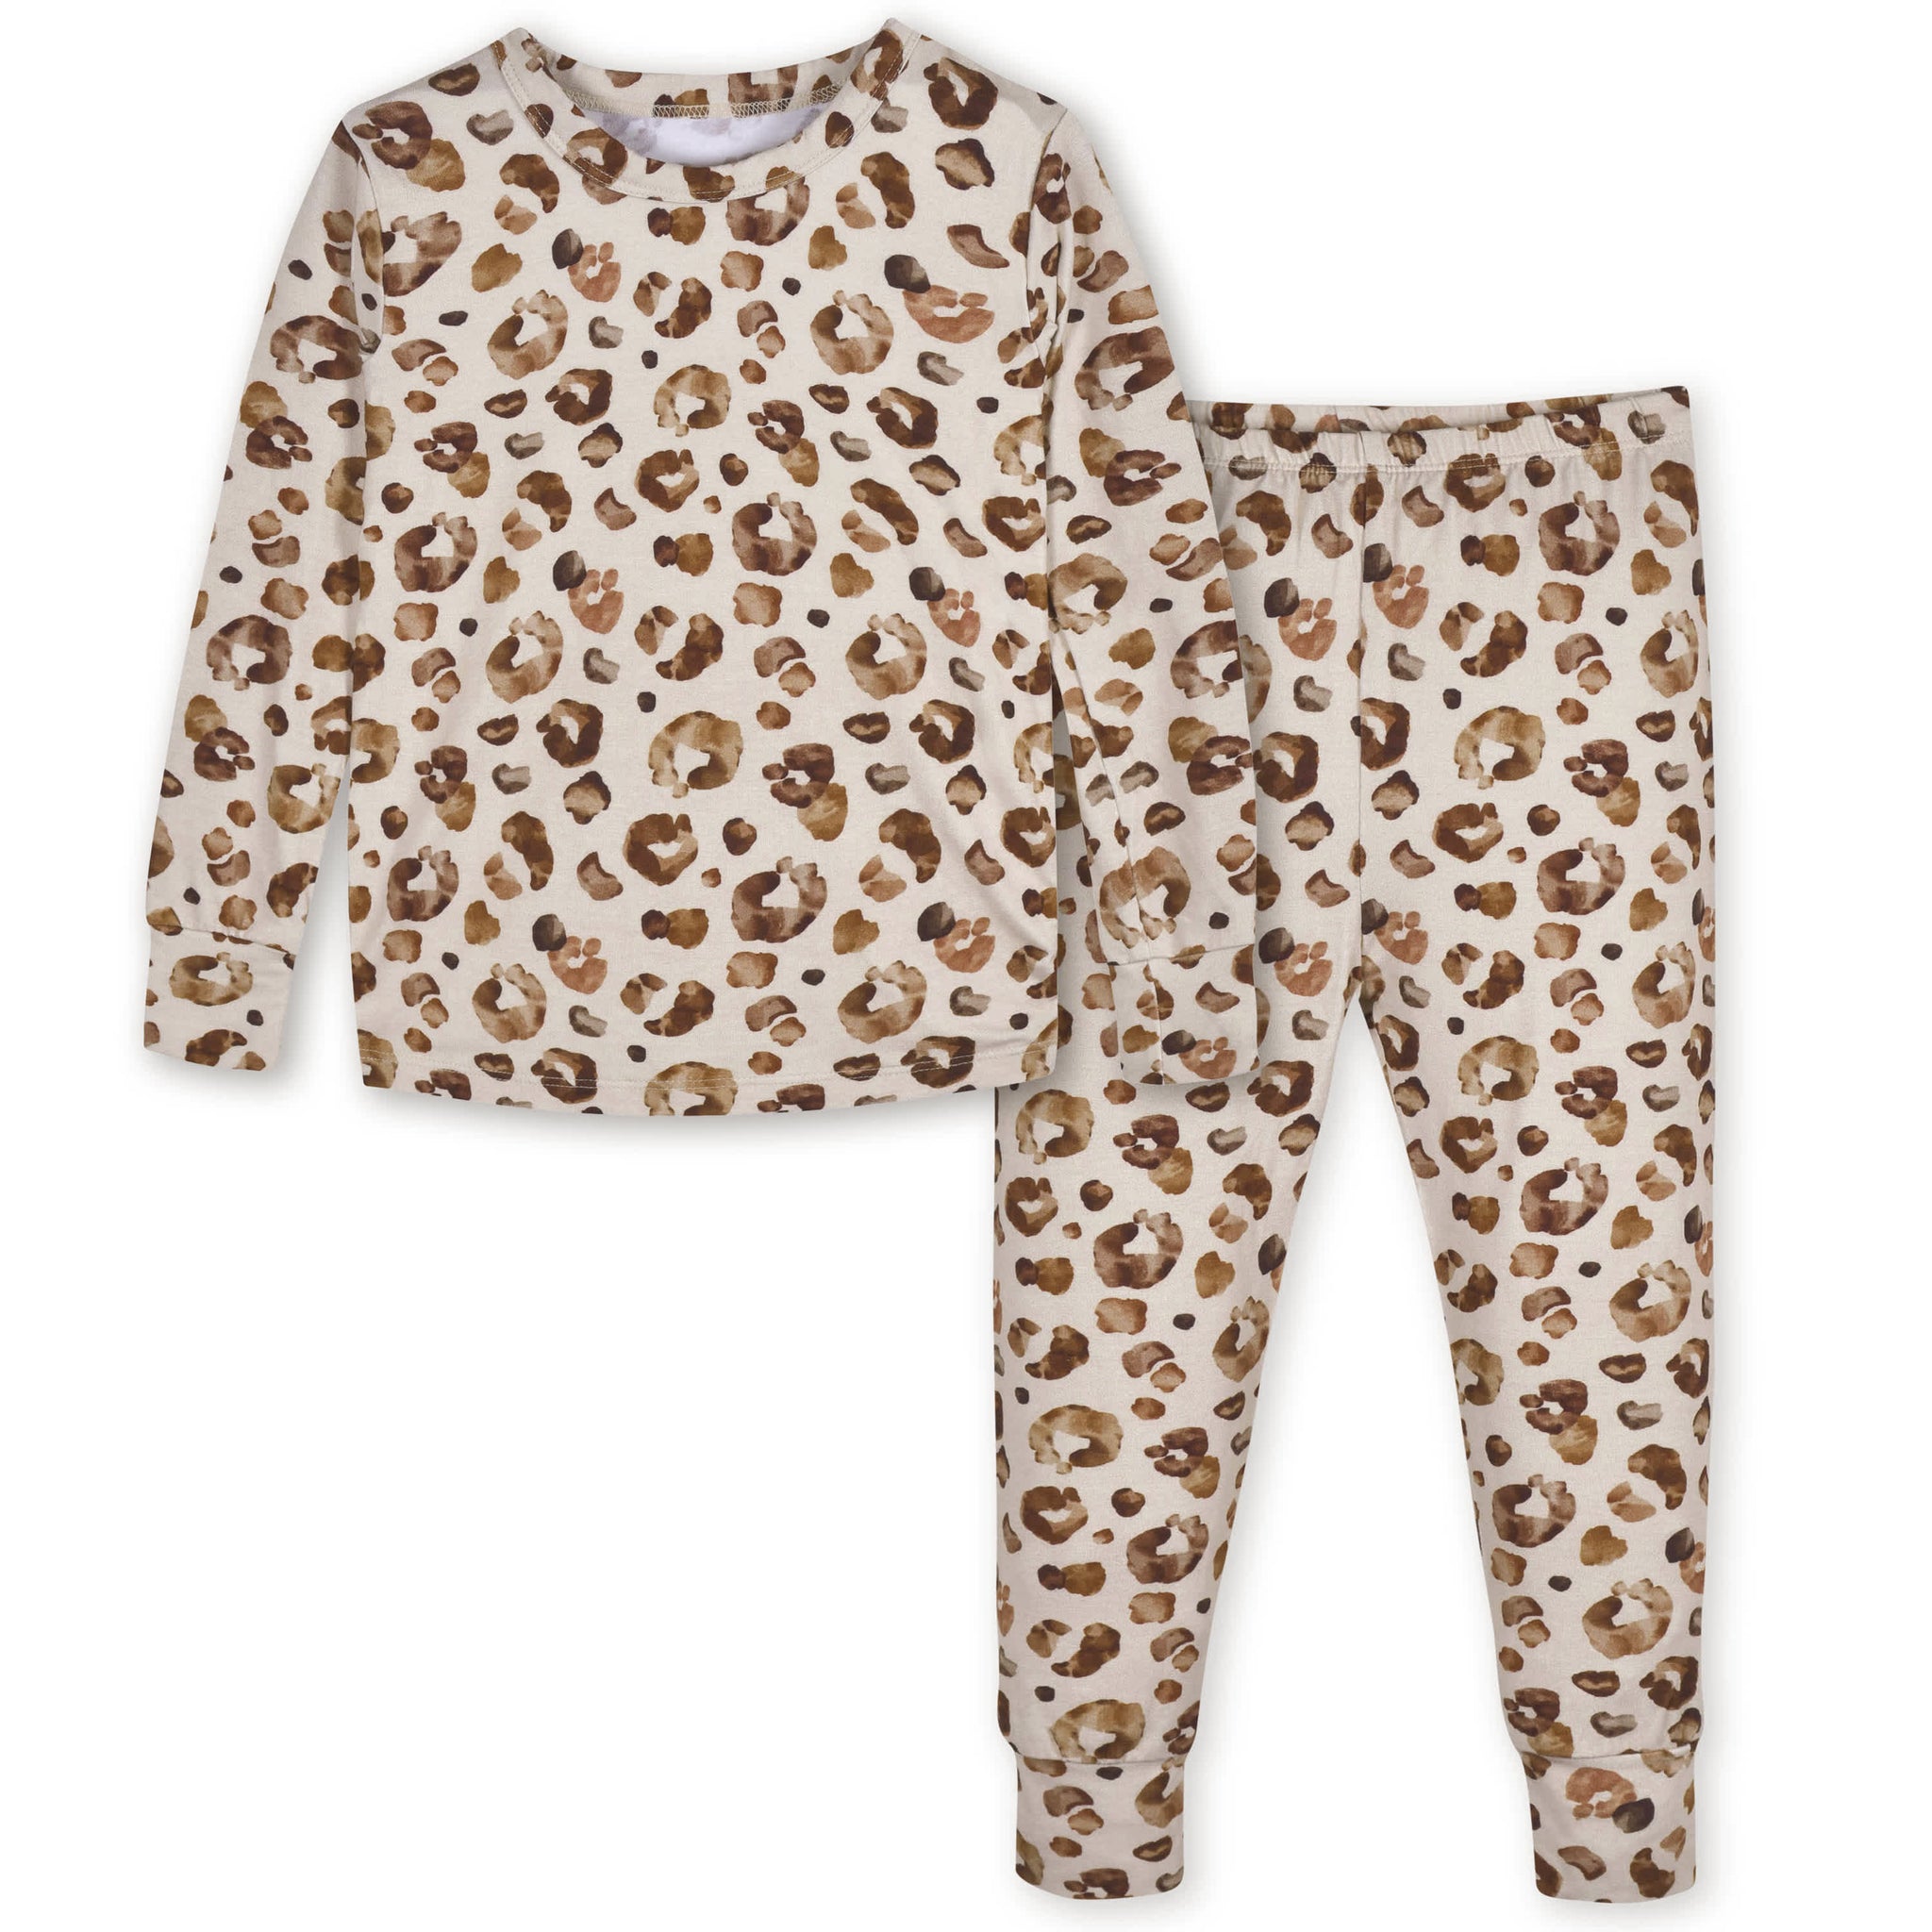 2-Piece Infant & Toddler Spotted Leopard Buttery Soft Viscose Made from Eucalyptus Snug Fit Pajamas-Gerber Childrenswear Wholesale